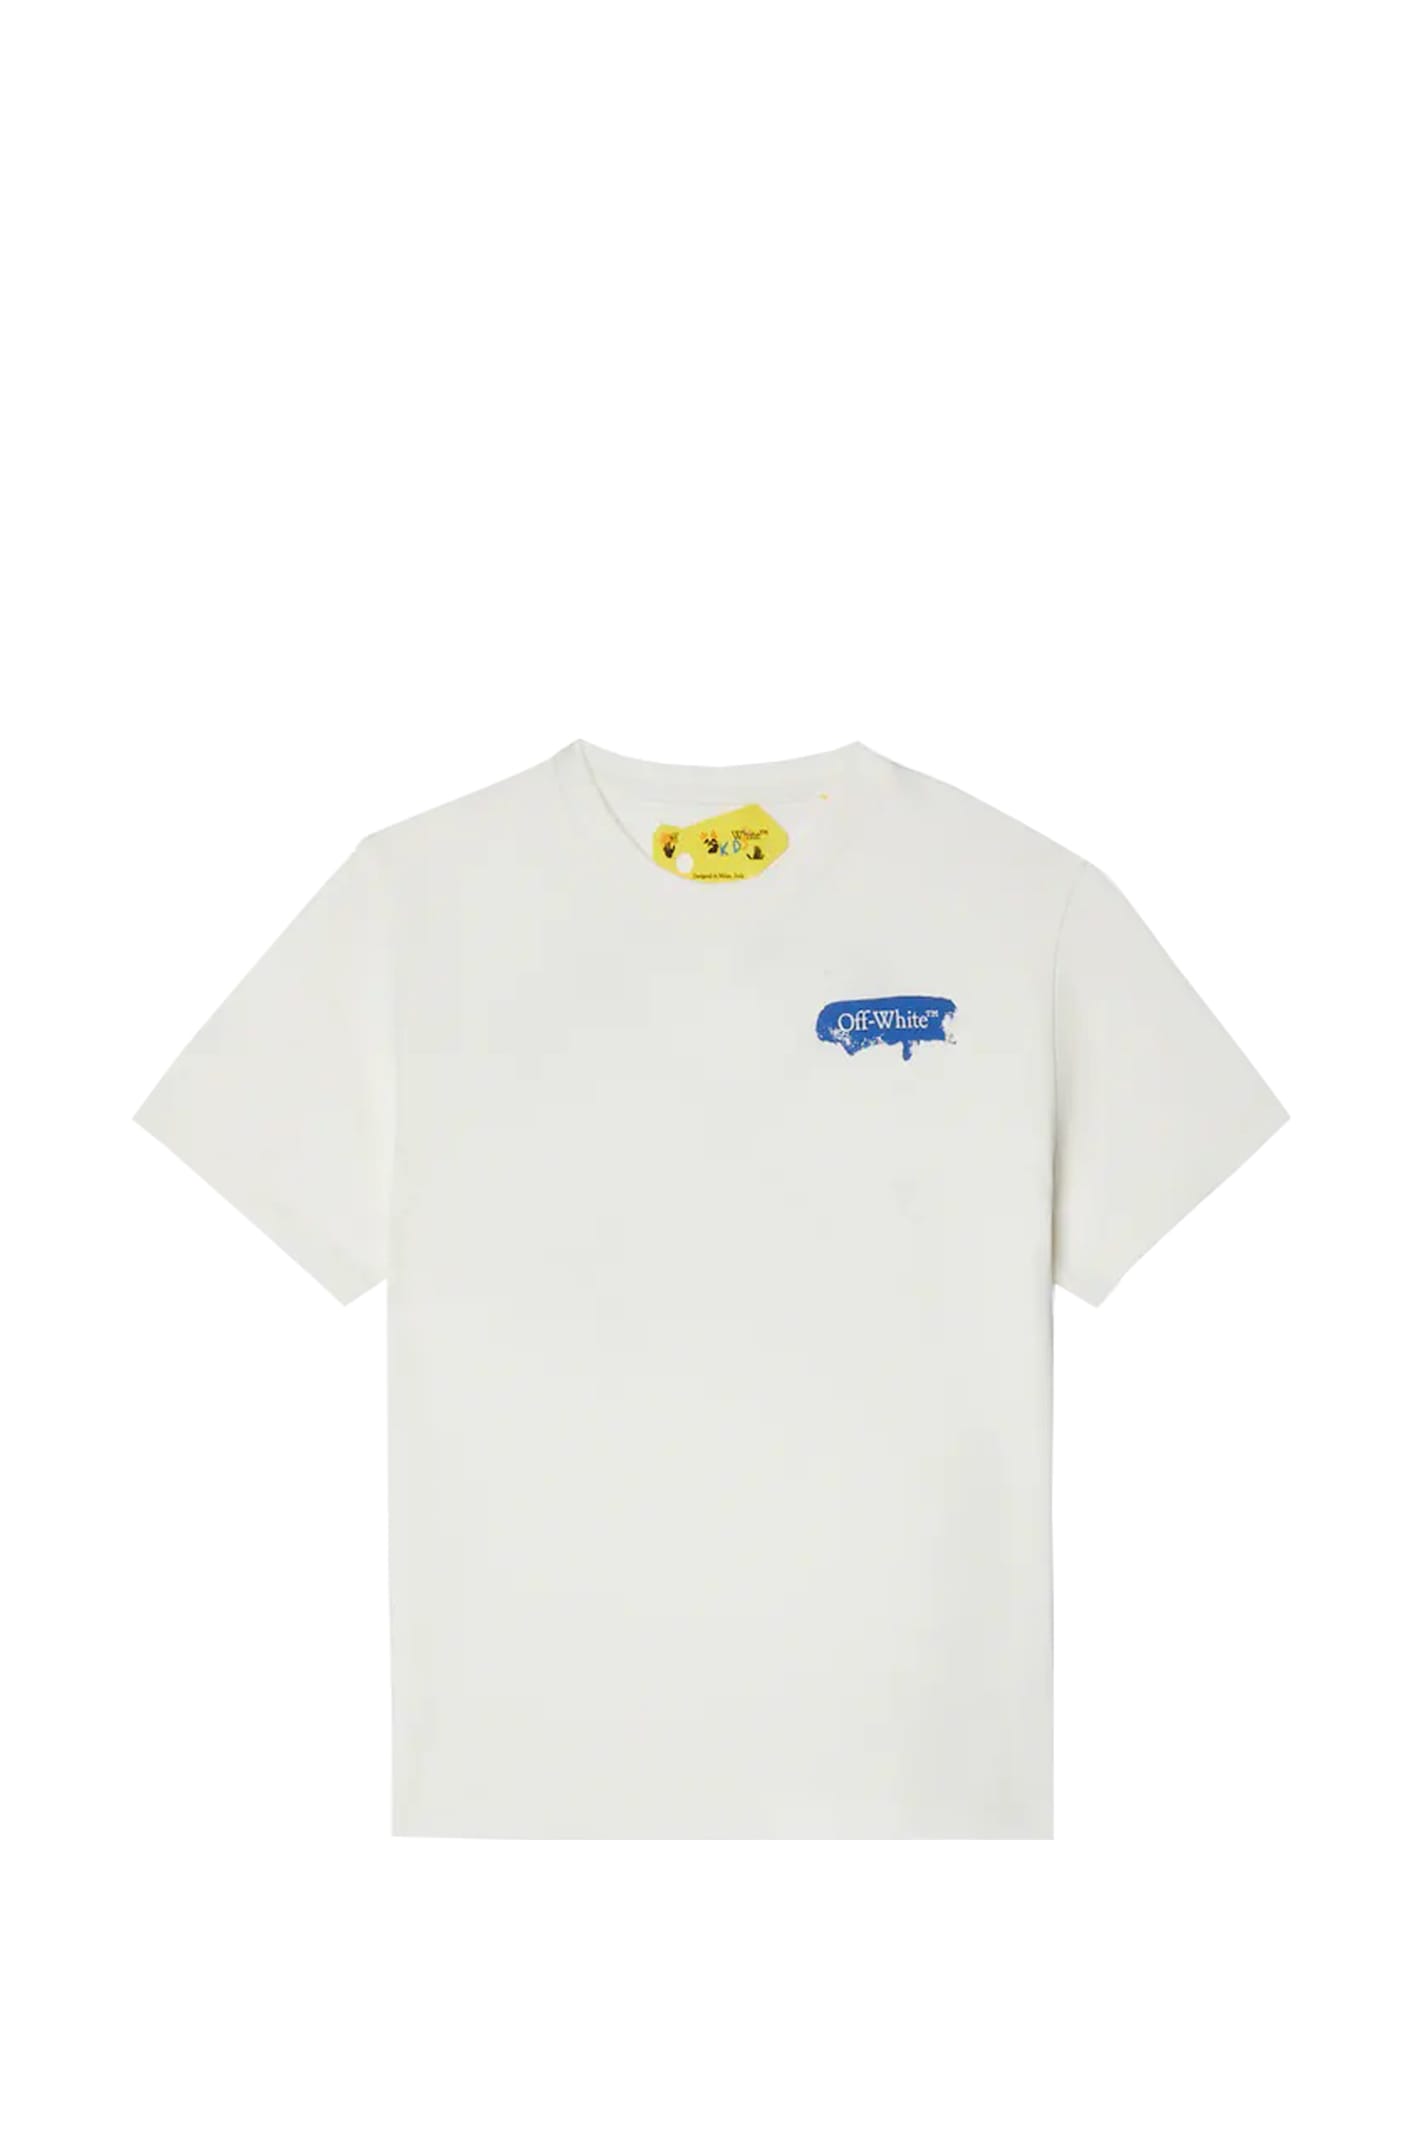 OFF-WHITE T-SHIRT WITH PAINT GRAPHIC MOTIF